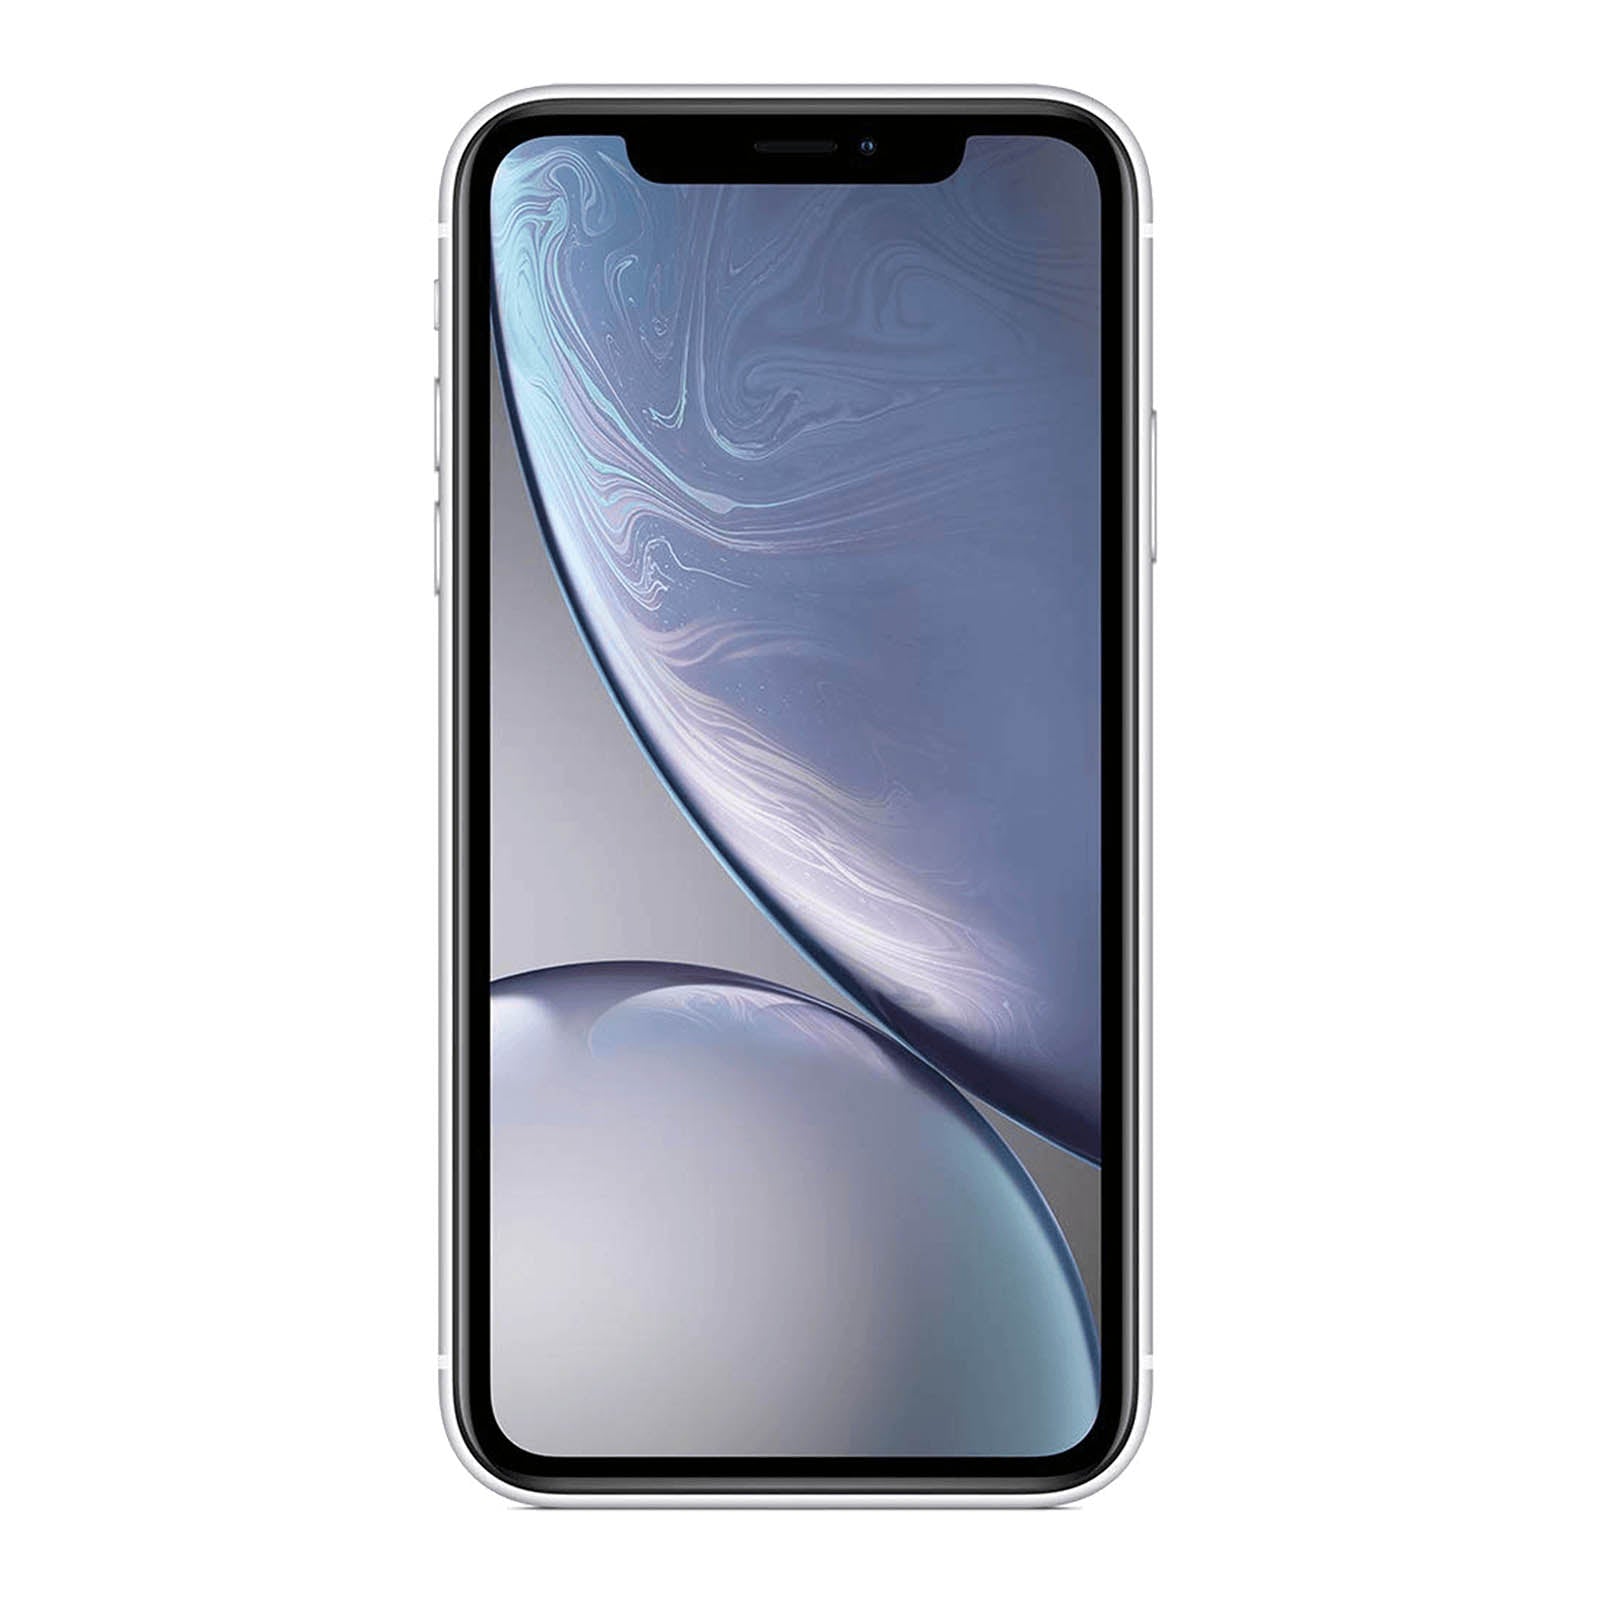 Apple iPhone XR 128GB White Good - T-Mobile